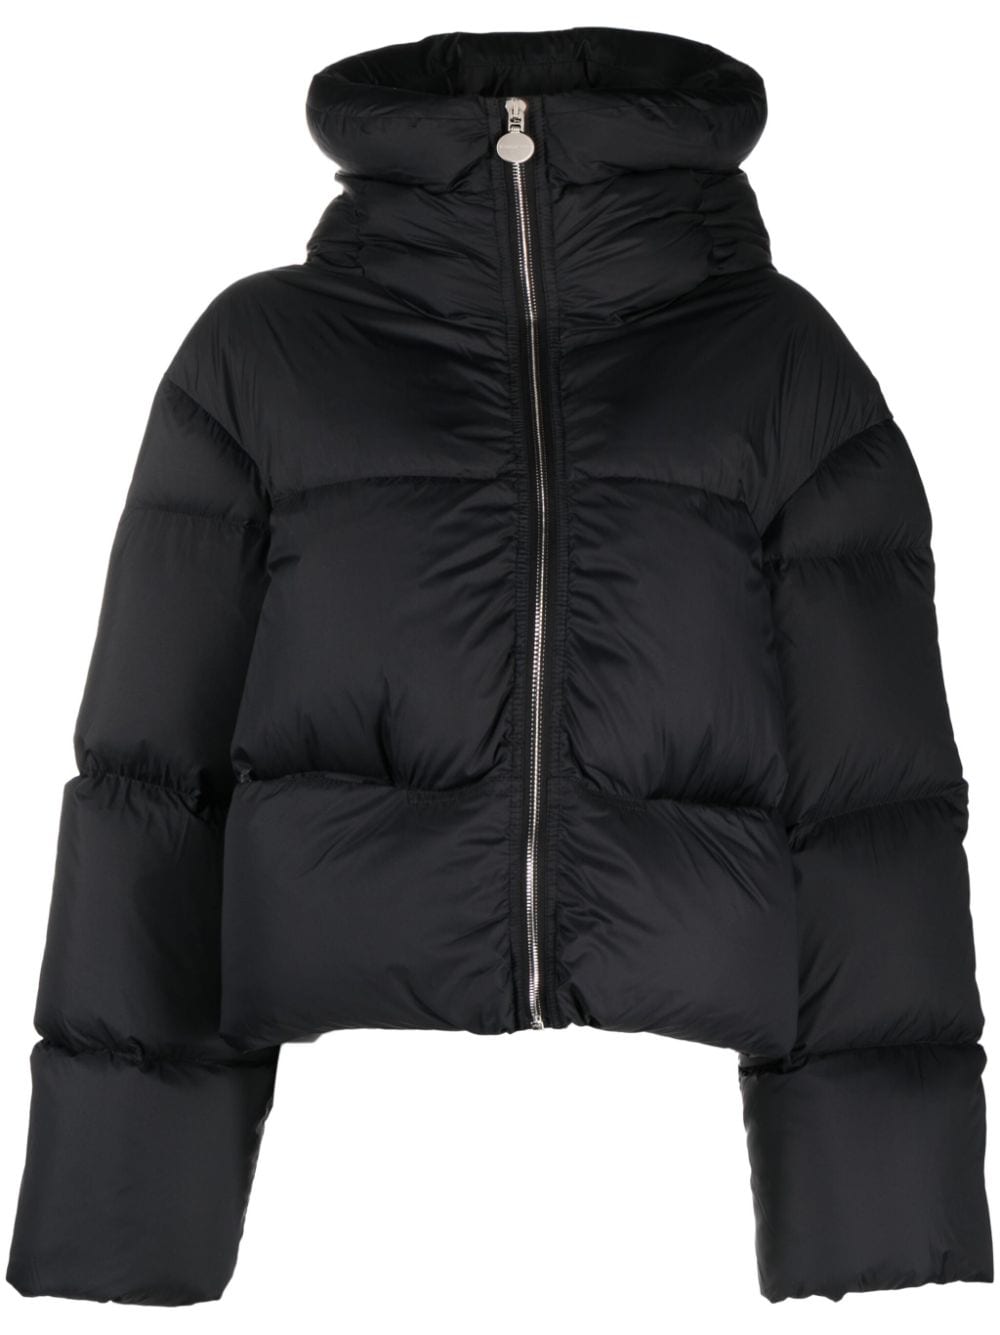 Kenny hooded puffer jacket